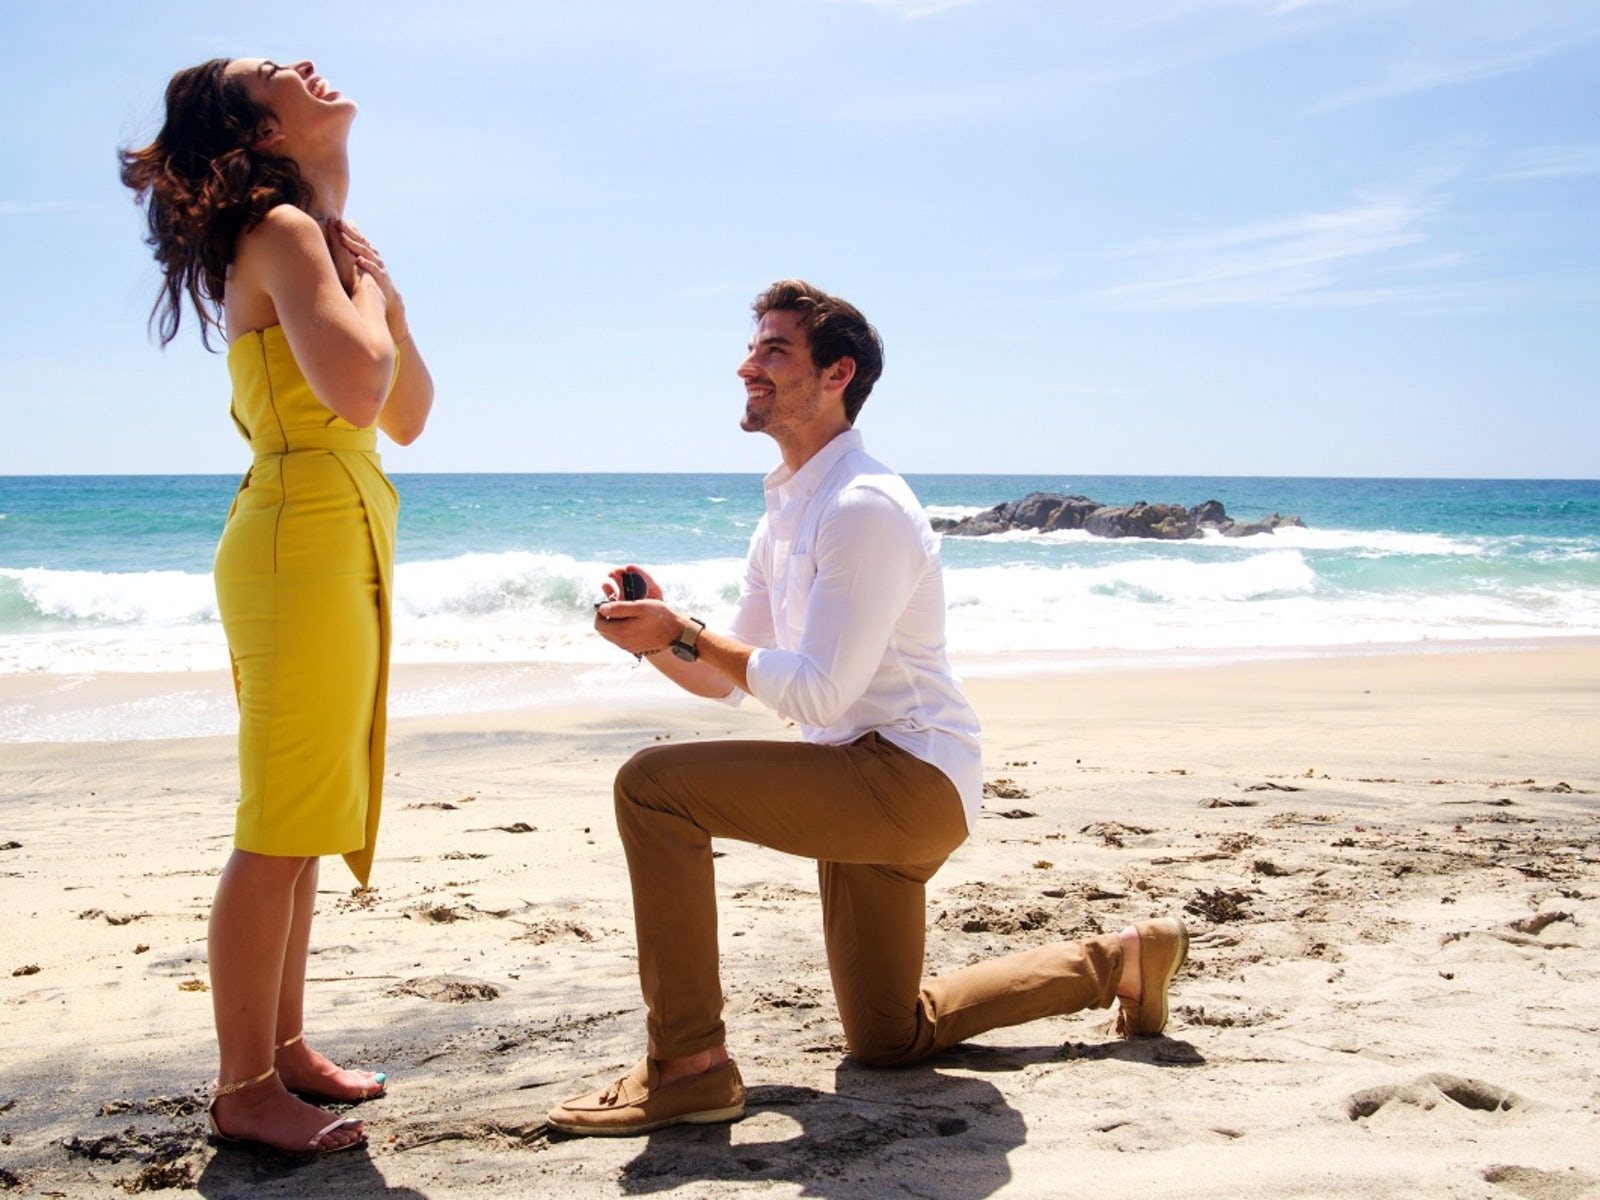 'Bachelor in Paradise' Season 5 premiere date announced by ABC